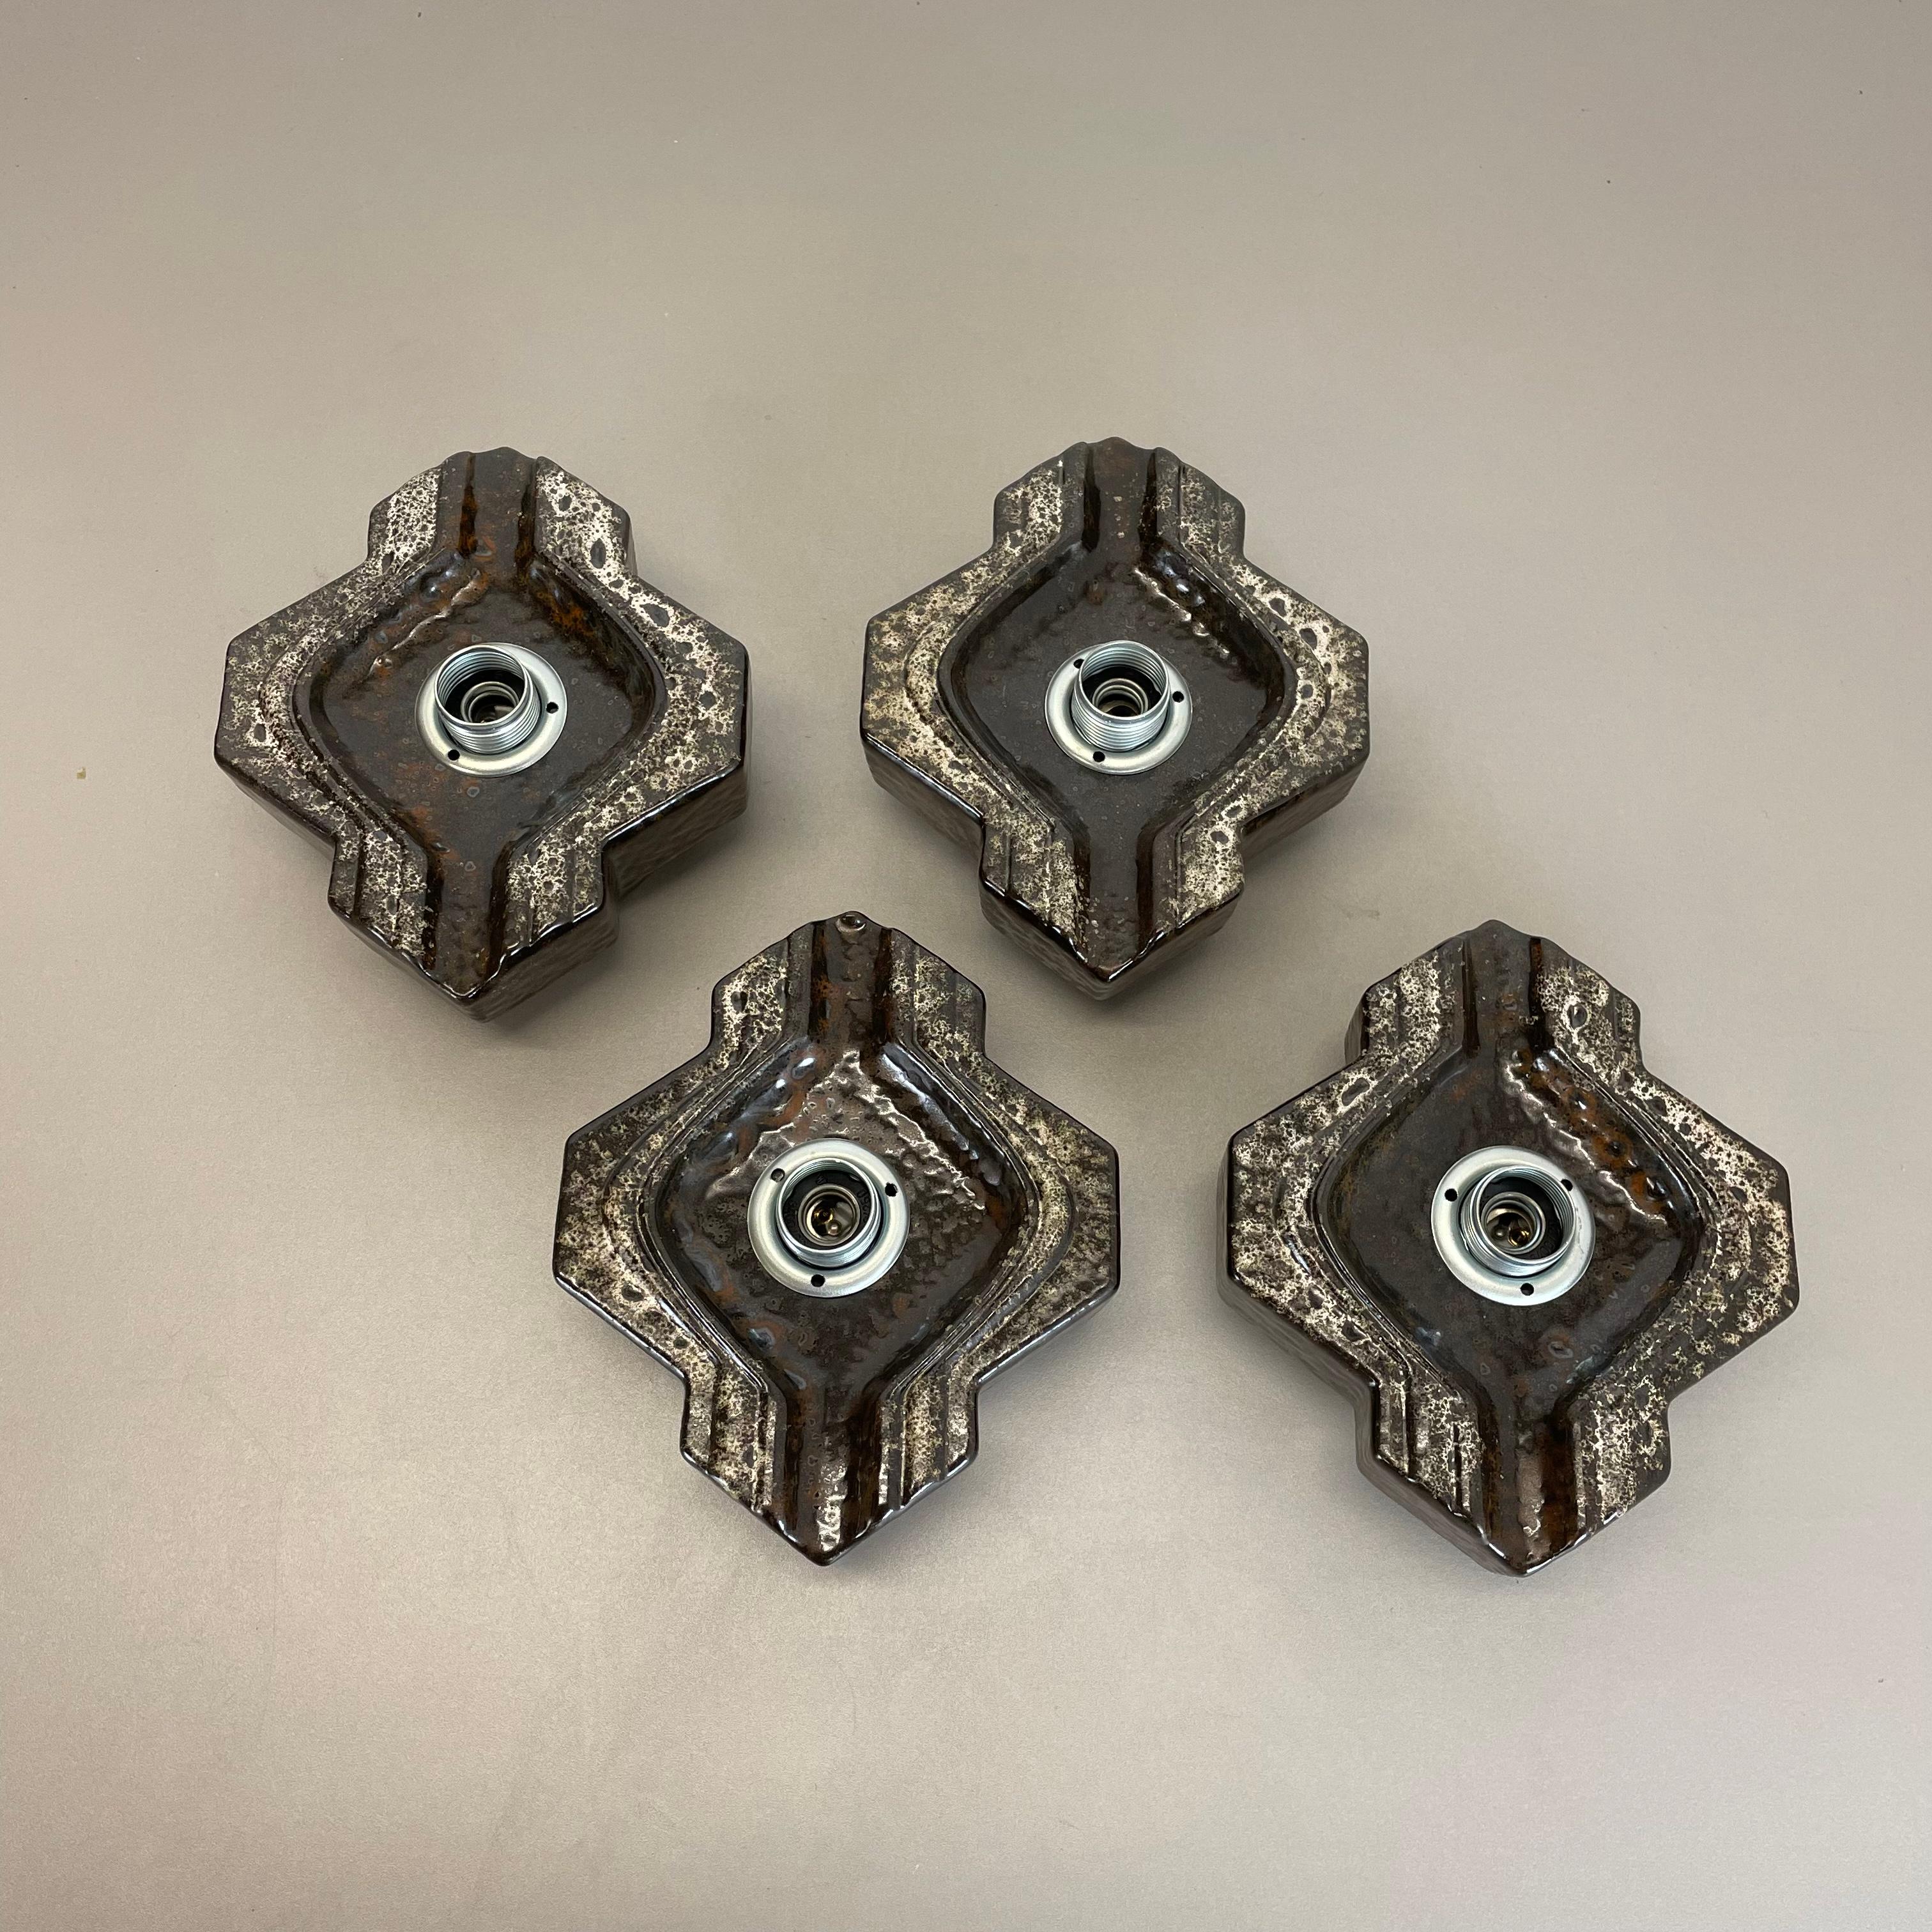 Article:

Wall light sconce set of four


Producer:

Pan Ceramic, Germany.



Origin:

Germany.



Age:

1970s.



Description:

Original 1970s modernist German wall light made of ceramic in fat lava optic. This super rare set of four walls light